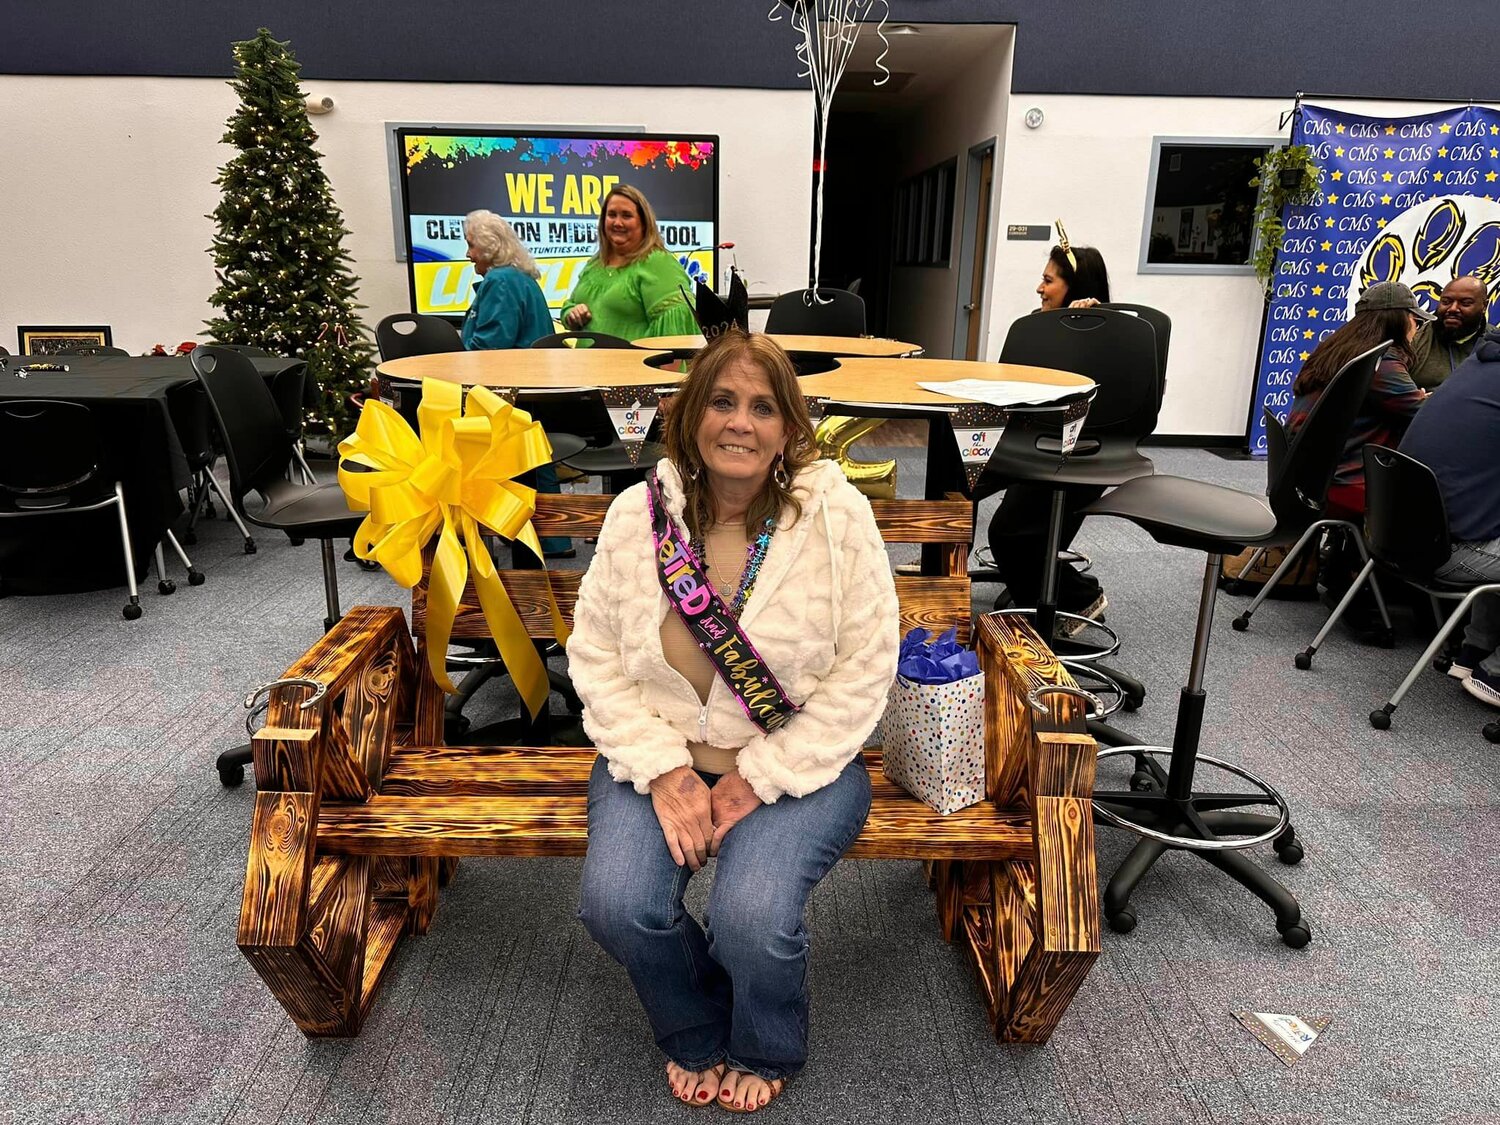 CLEWISTON -- On Jan. 8, Clewiston Middle School honored  Sharon Lee on her retirement. For more photos, see the Clewiston Middle School page on Facebook. [Photo courtesy Clewiston Middle School]